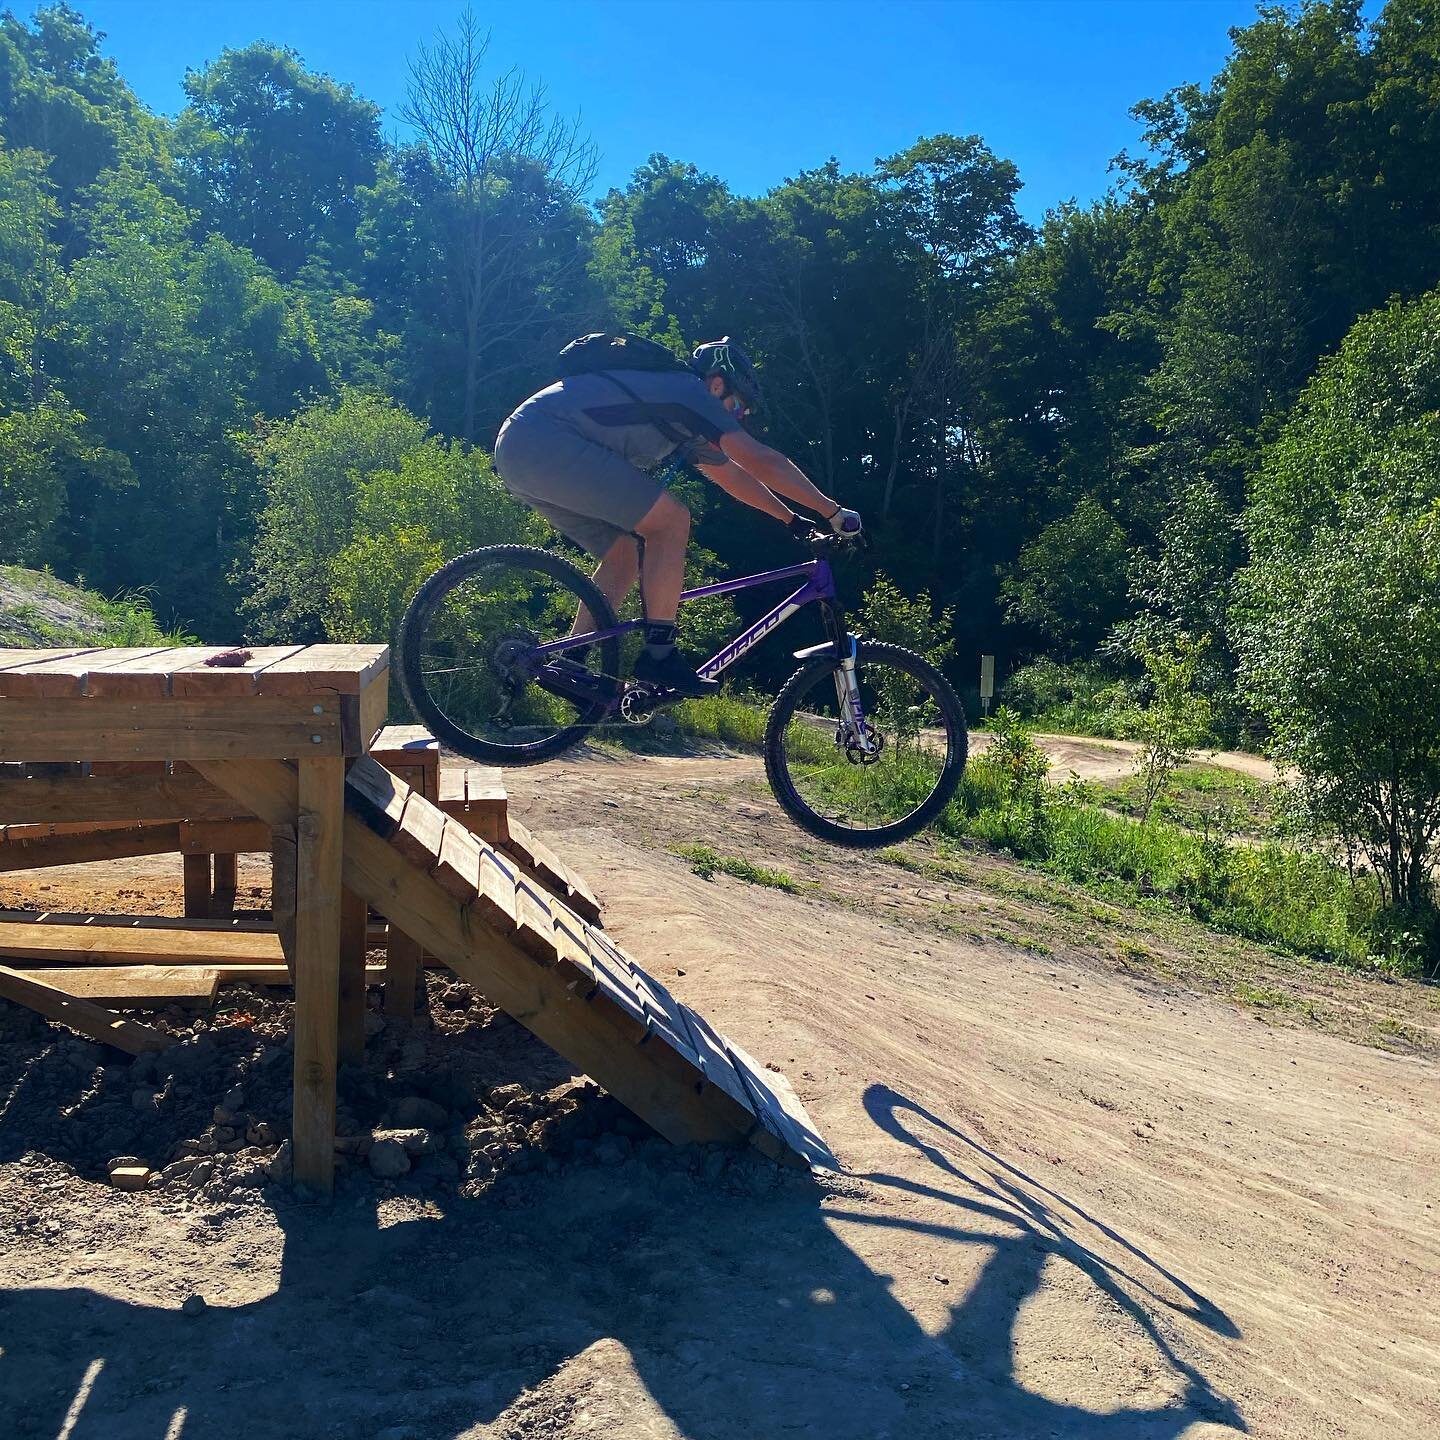 Here in Ontario we have so few places that are willing to add airborn features to our trails. Thank you @the_hydrocut for showing how it looks to do trail development and risk management right!!! #thehydrocut